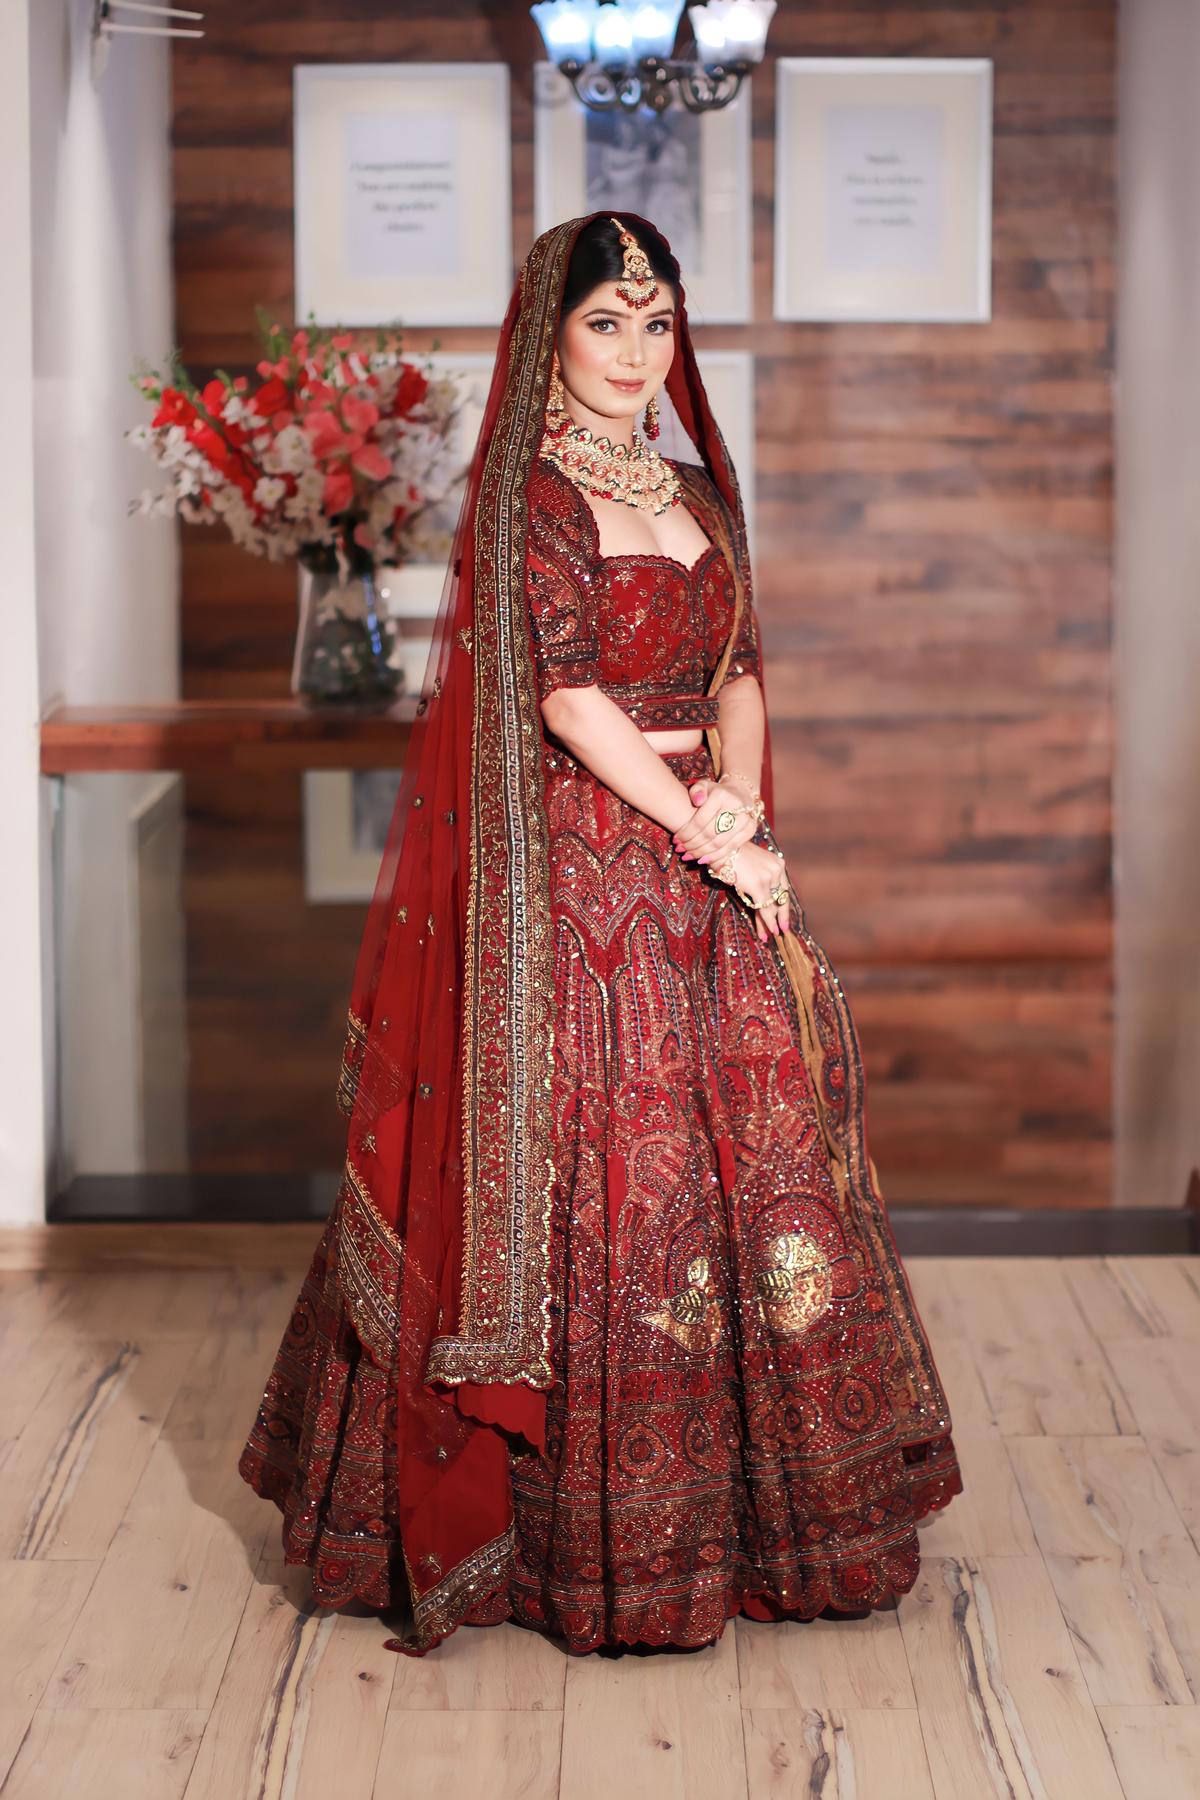 Brides That Picked Wine Coloured Lehengas For Their Wedding Soirees! | モデル